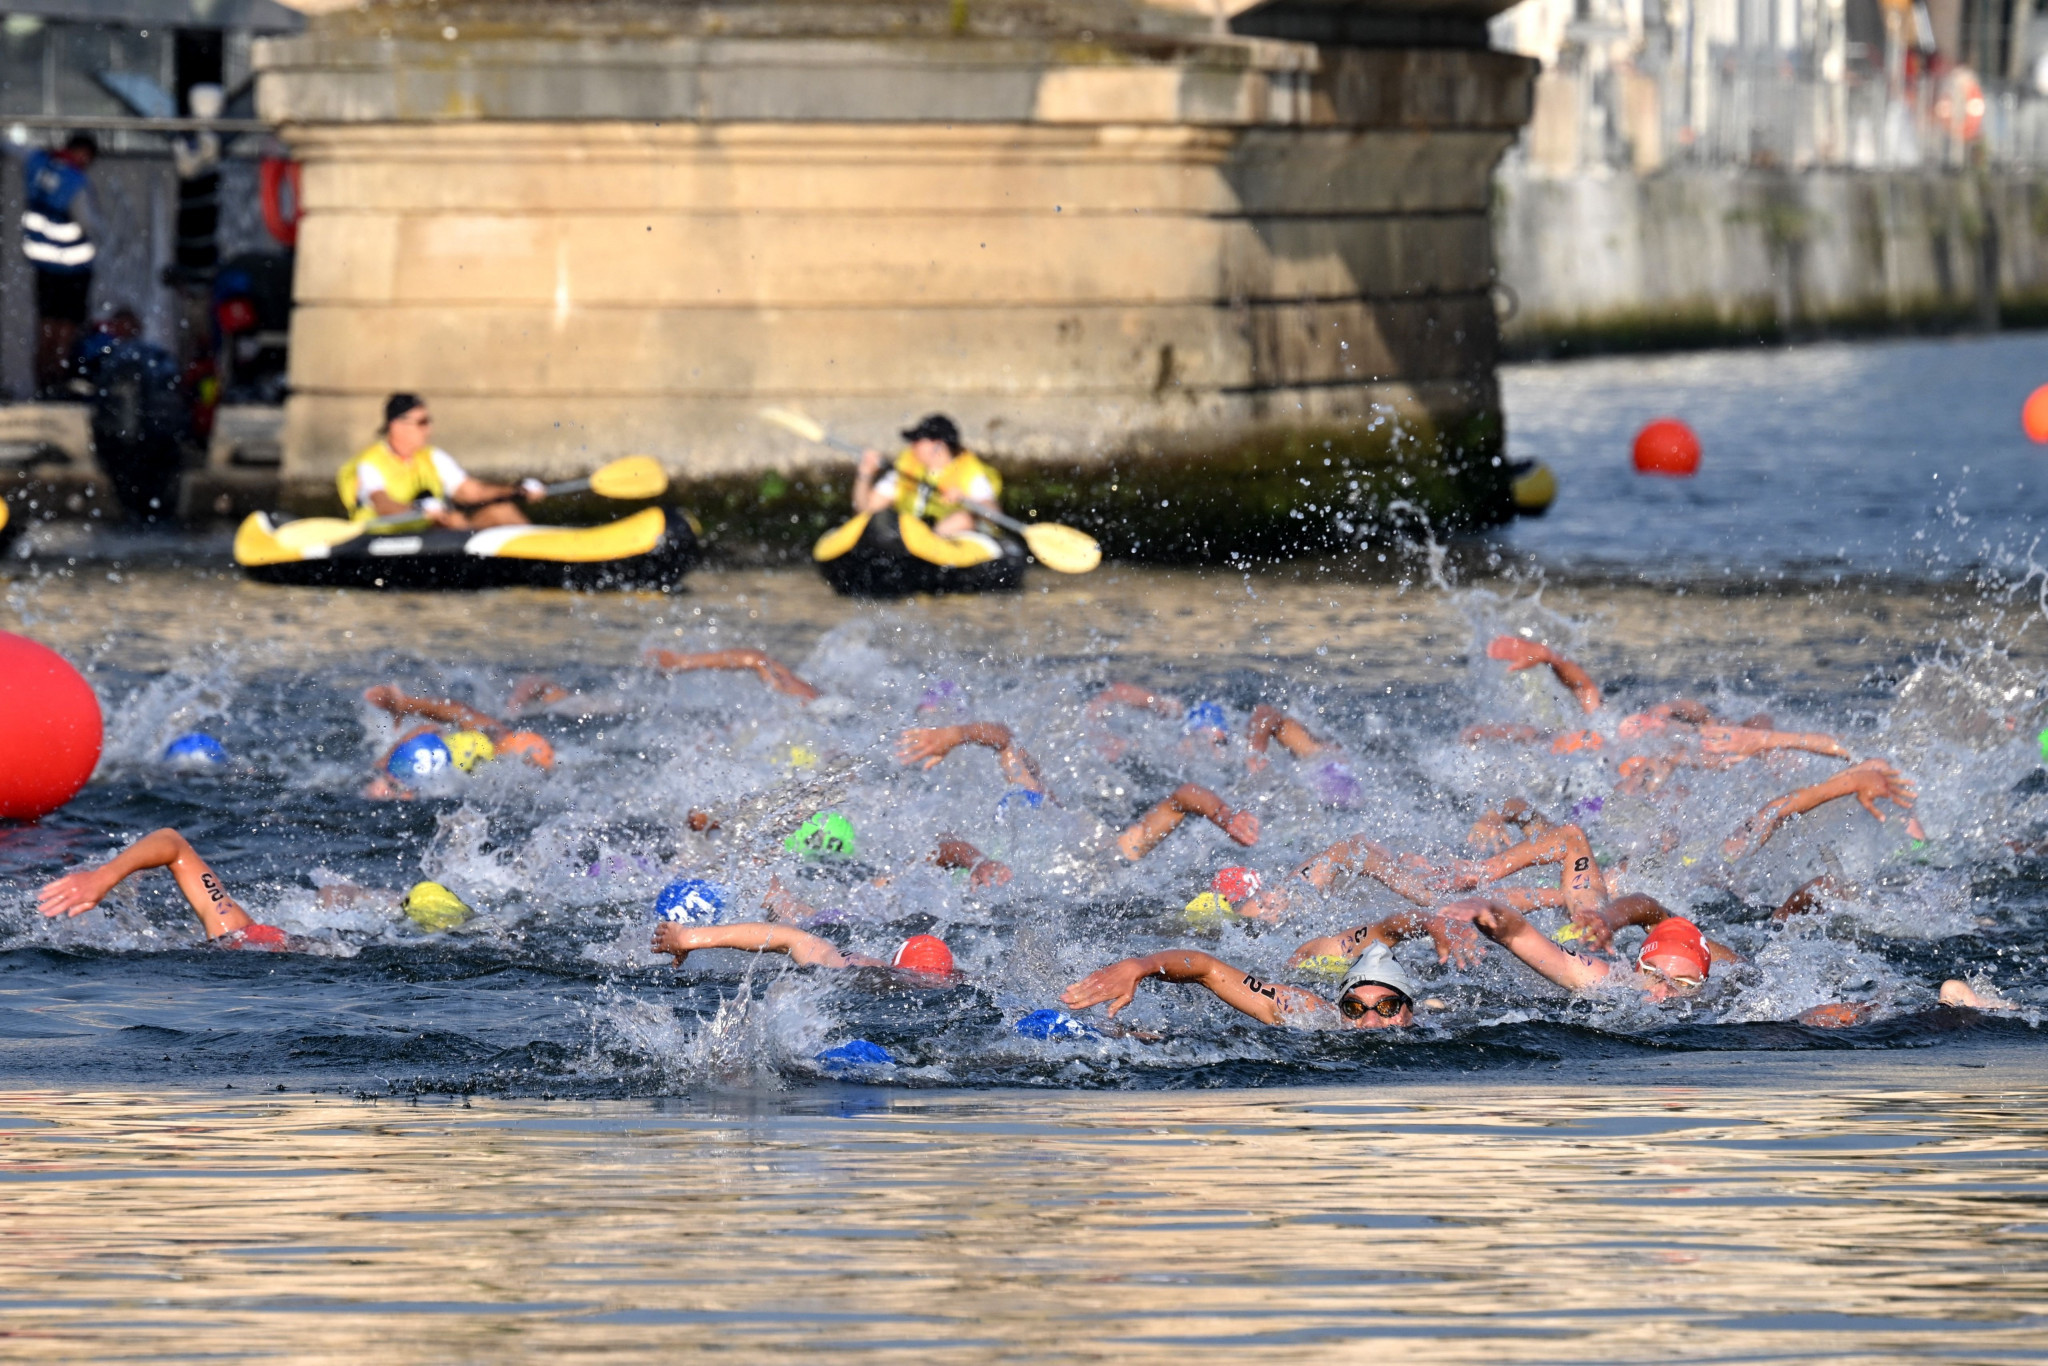 World Triathlon has ruled against using the Seine for its Paralympic test event over health risks ©Getty Images